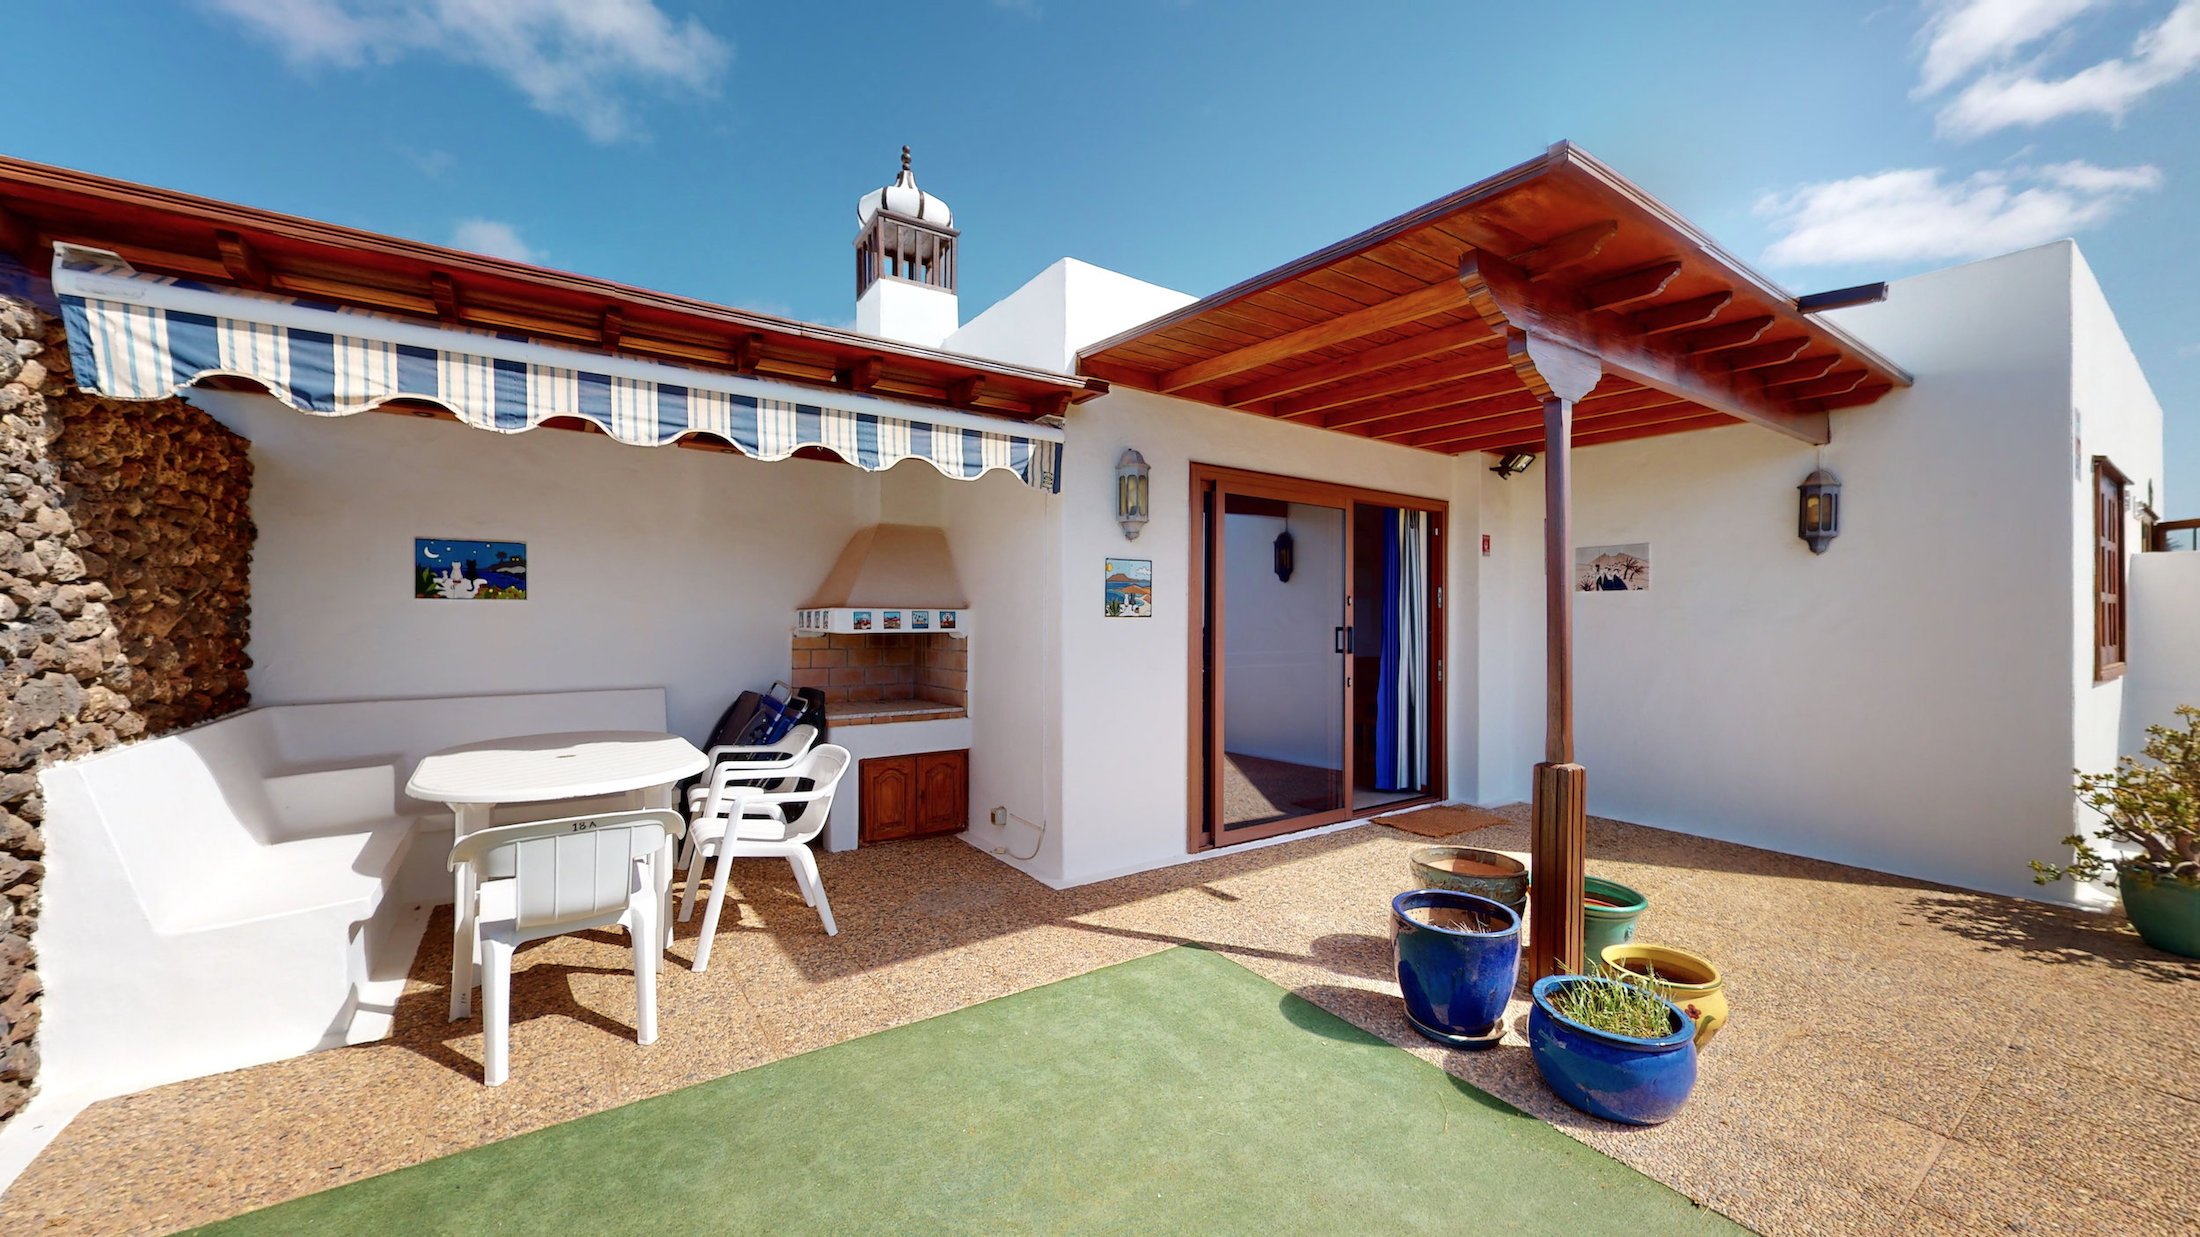 CHARMING SEMI-DETACHED VILLA WITH COMMUNAL POOL AND TENNIS COURT